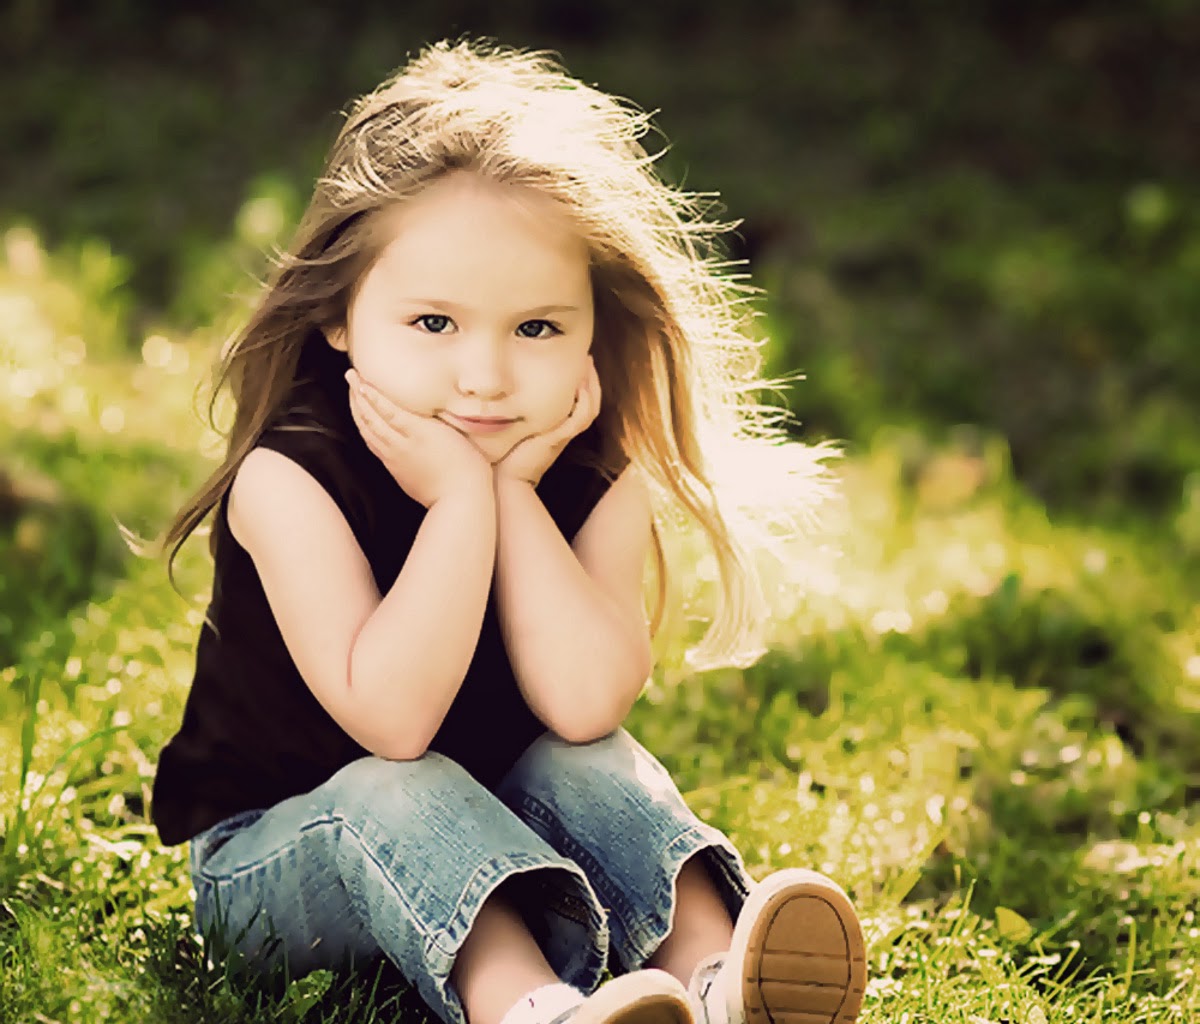  Baby  Wallpapers  HD Beautiful  wallpapers  collection 2014